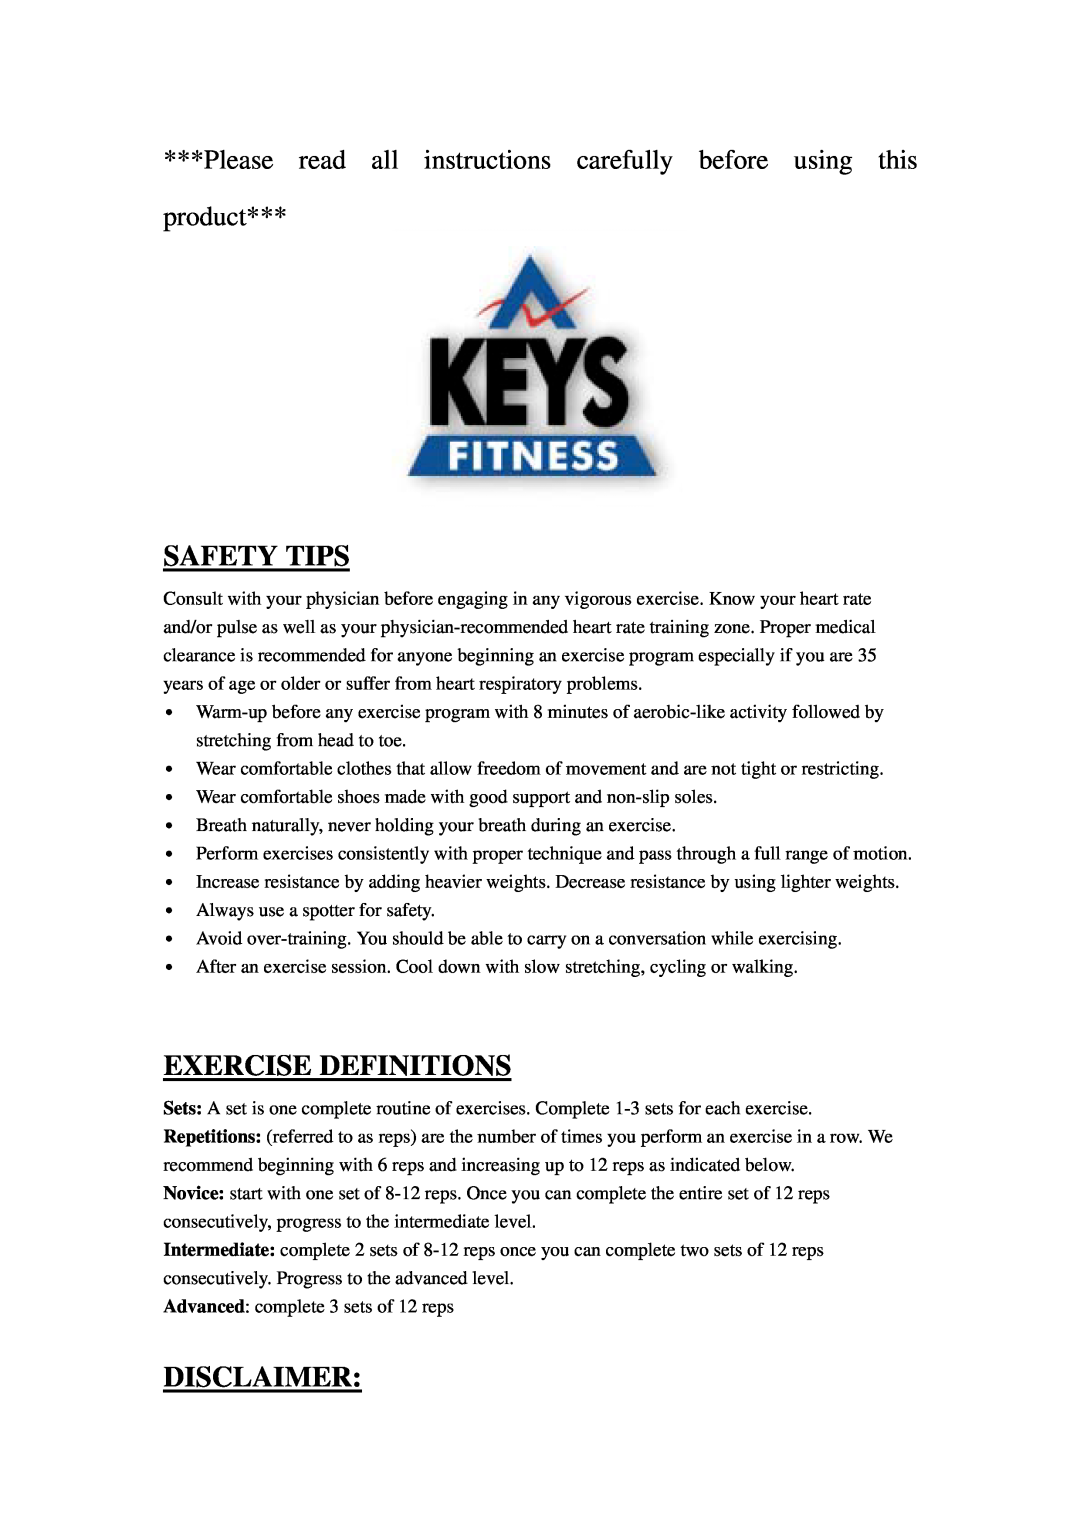 Keys Fitness ST-2600 owner manual Safety Tips, Exercise Definitions, Disclaimer 